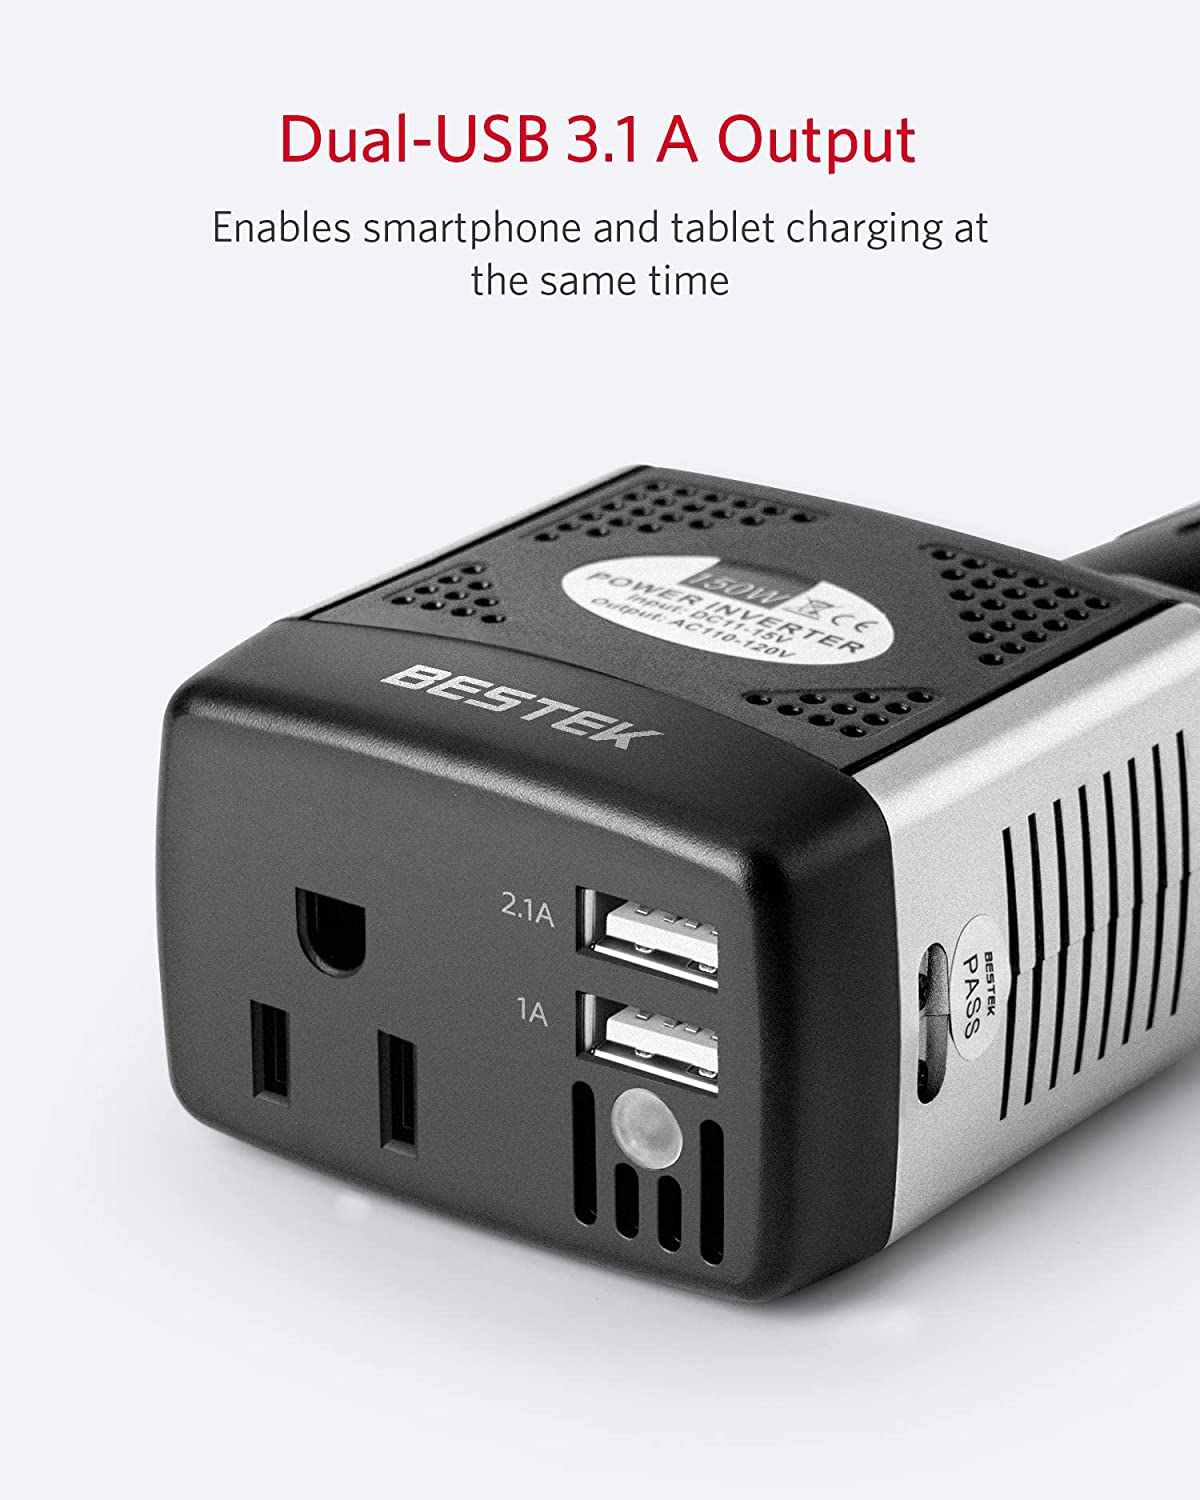 https://discounttoday.net/wp-content/uploads/2022/02/BESTEK-150W-Power-Inverter-12V-to-110V-Voltage-Converter-Car-Charger-Power-Adapter-with-2-USB-Charging-Ports-3.1A-Shared-150W-1.jpg